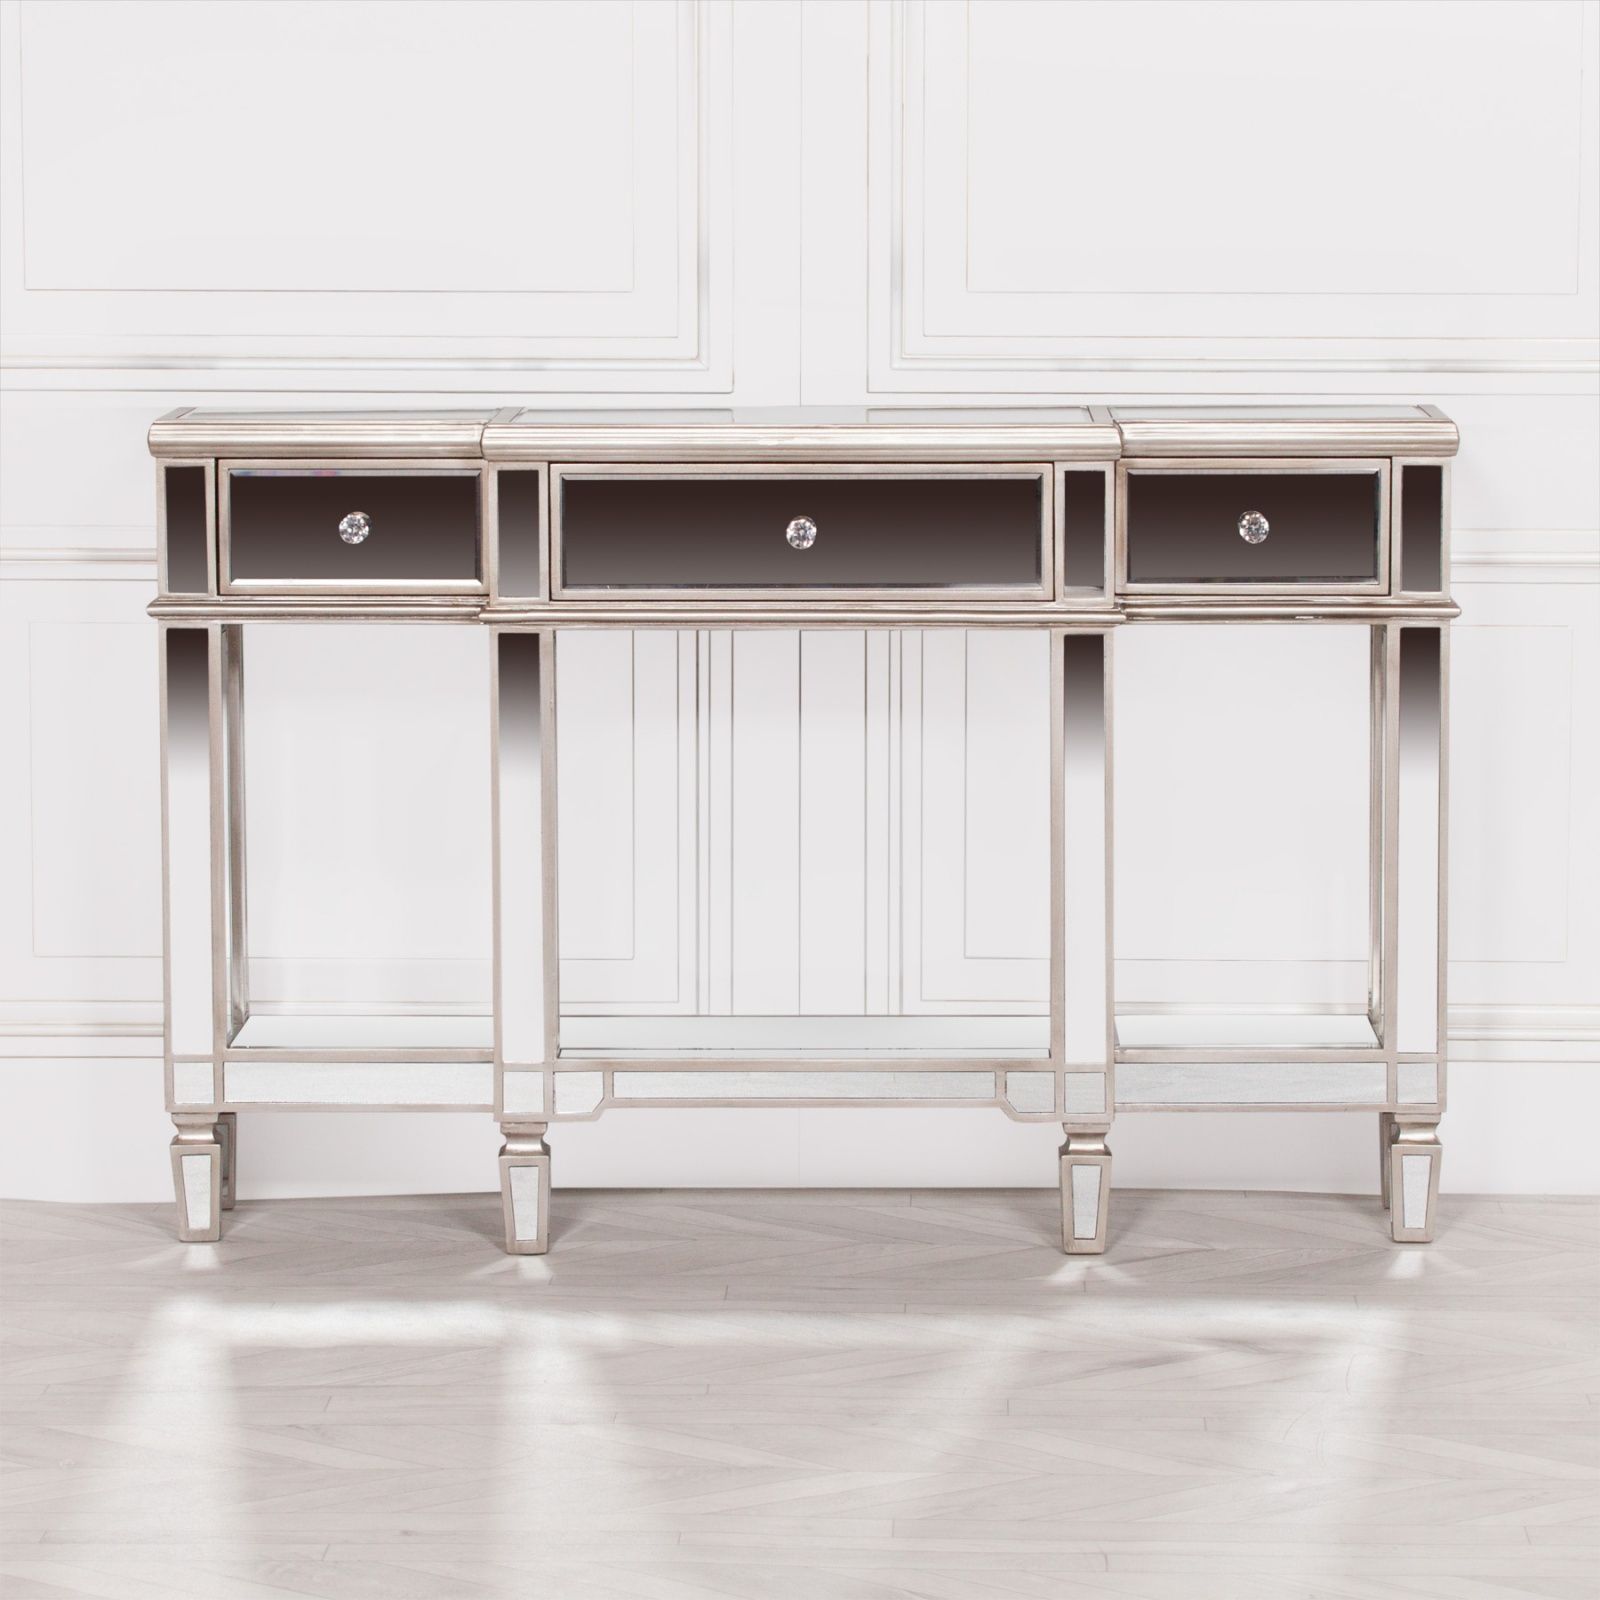 Venetian Hall Demilune Mirrored Silver Console Table Inside Silver Console Tables (View 11 of 20)